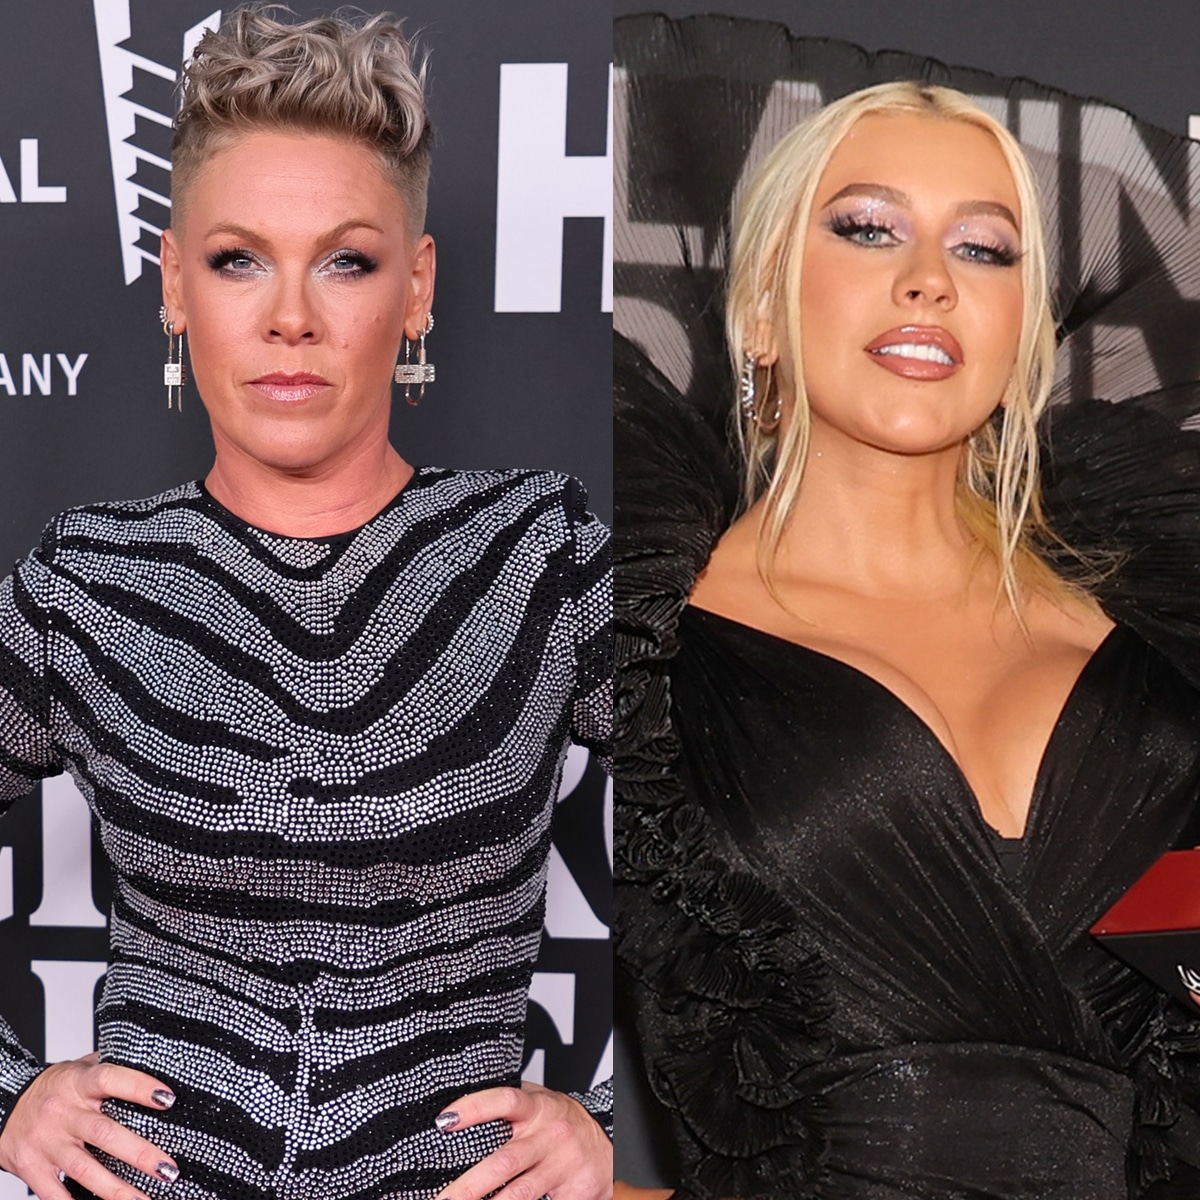 Pink Responds After Being Accused of Shading Christina Aguilera